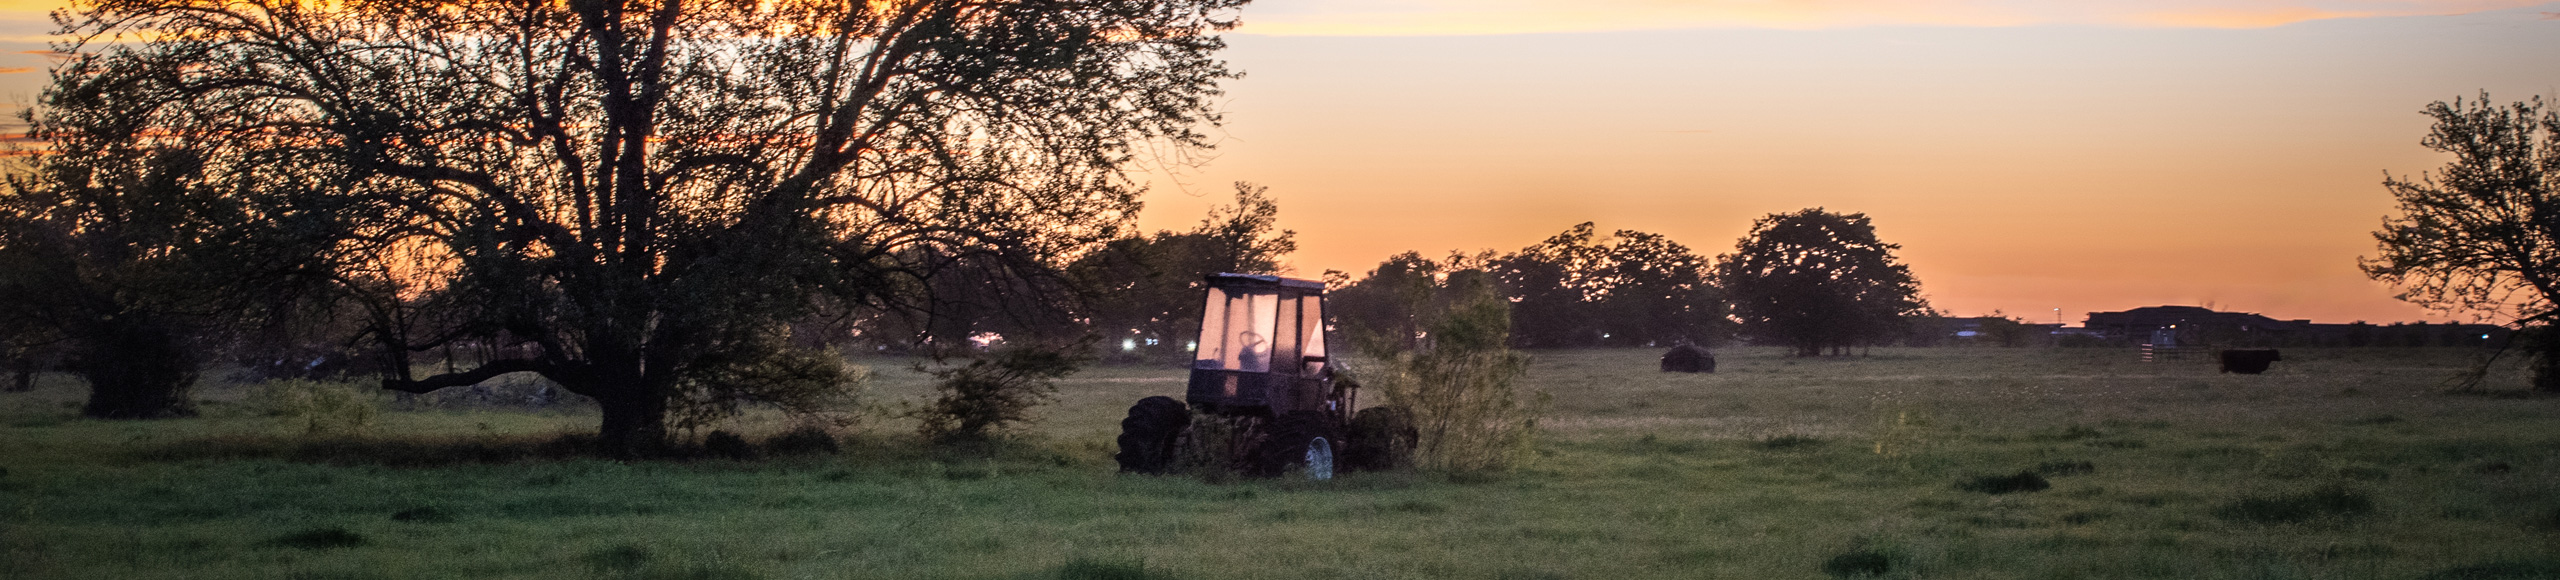 Pastoral scene around College Station, TX, a service area of MOVES Mobile Veterinary Specialists